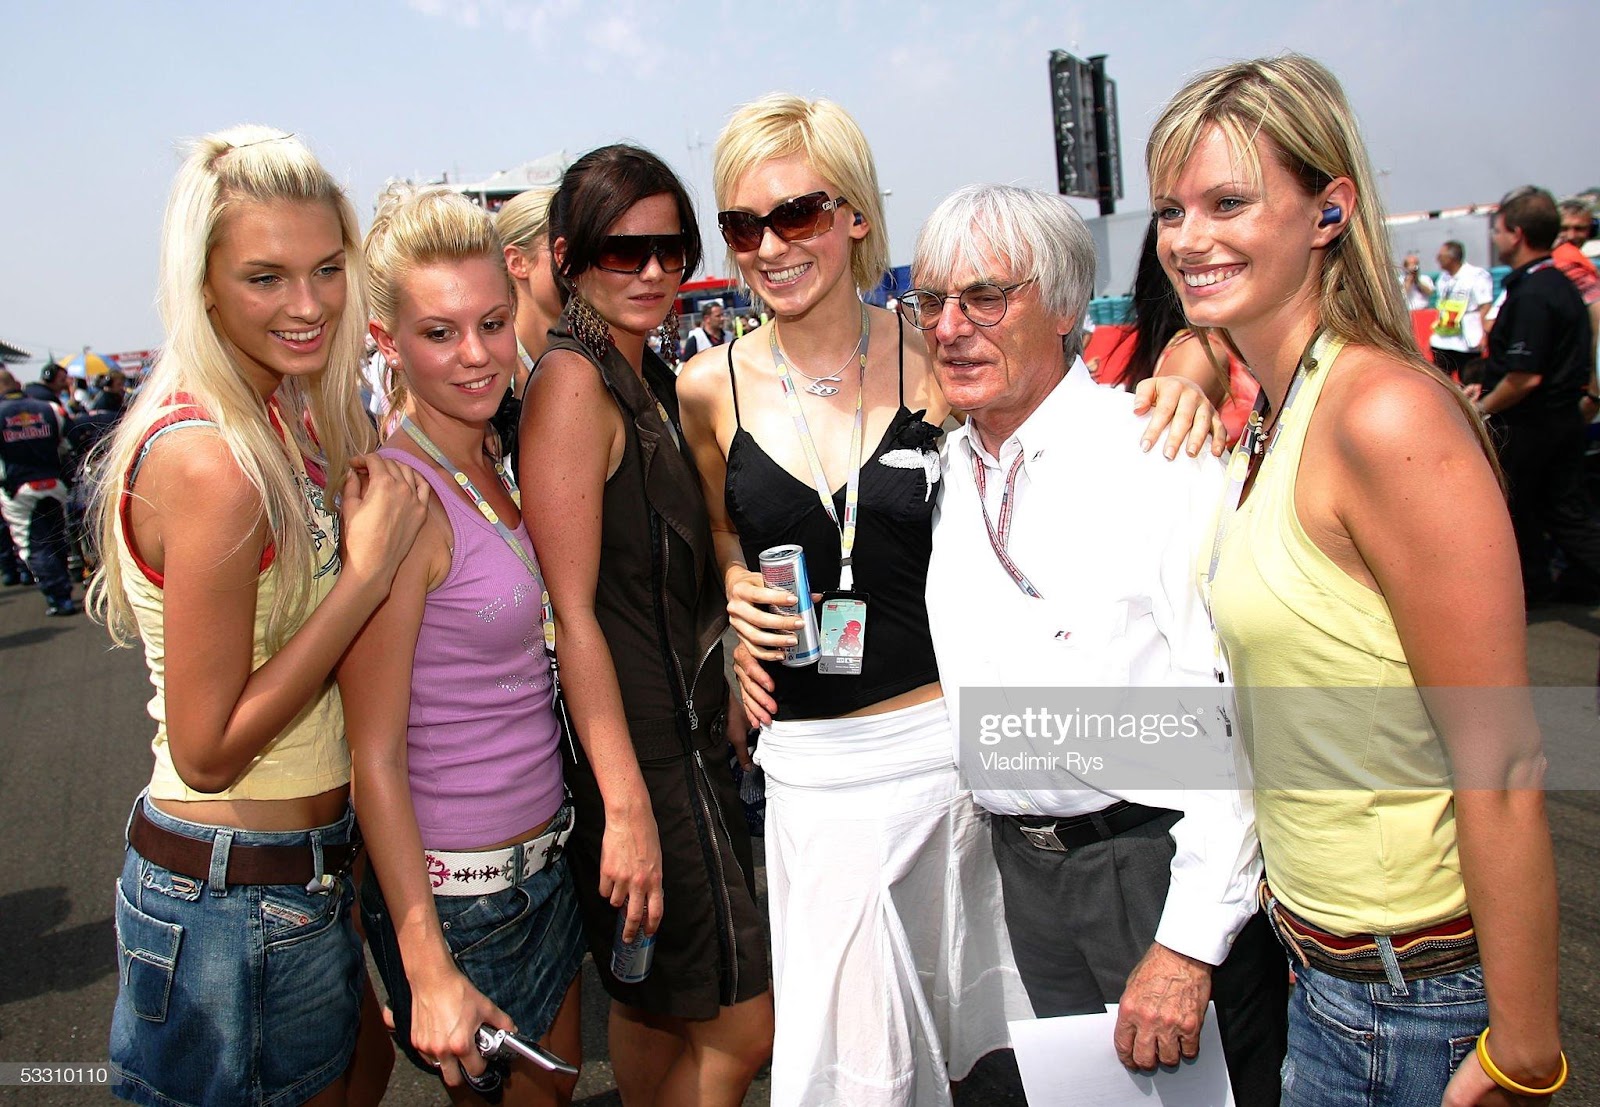 D:\Documenti\posts\posts\Women and motorsport\foto\Getty e altre\bernie-ecclestone-pose-on-the-starting-grid-with-the-girls-for-the-picture-id53310110.jpg